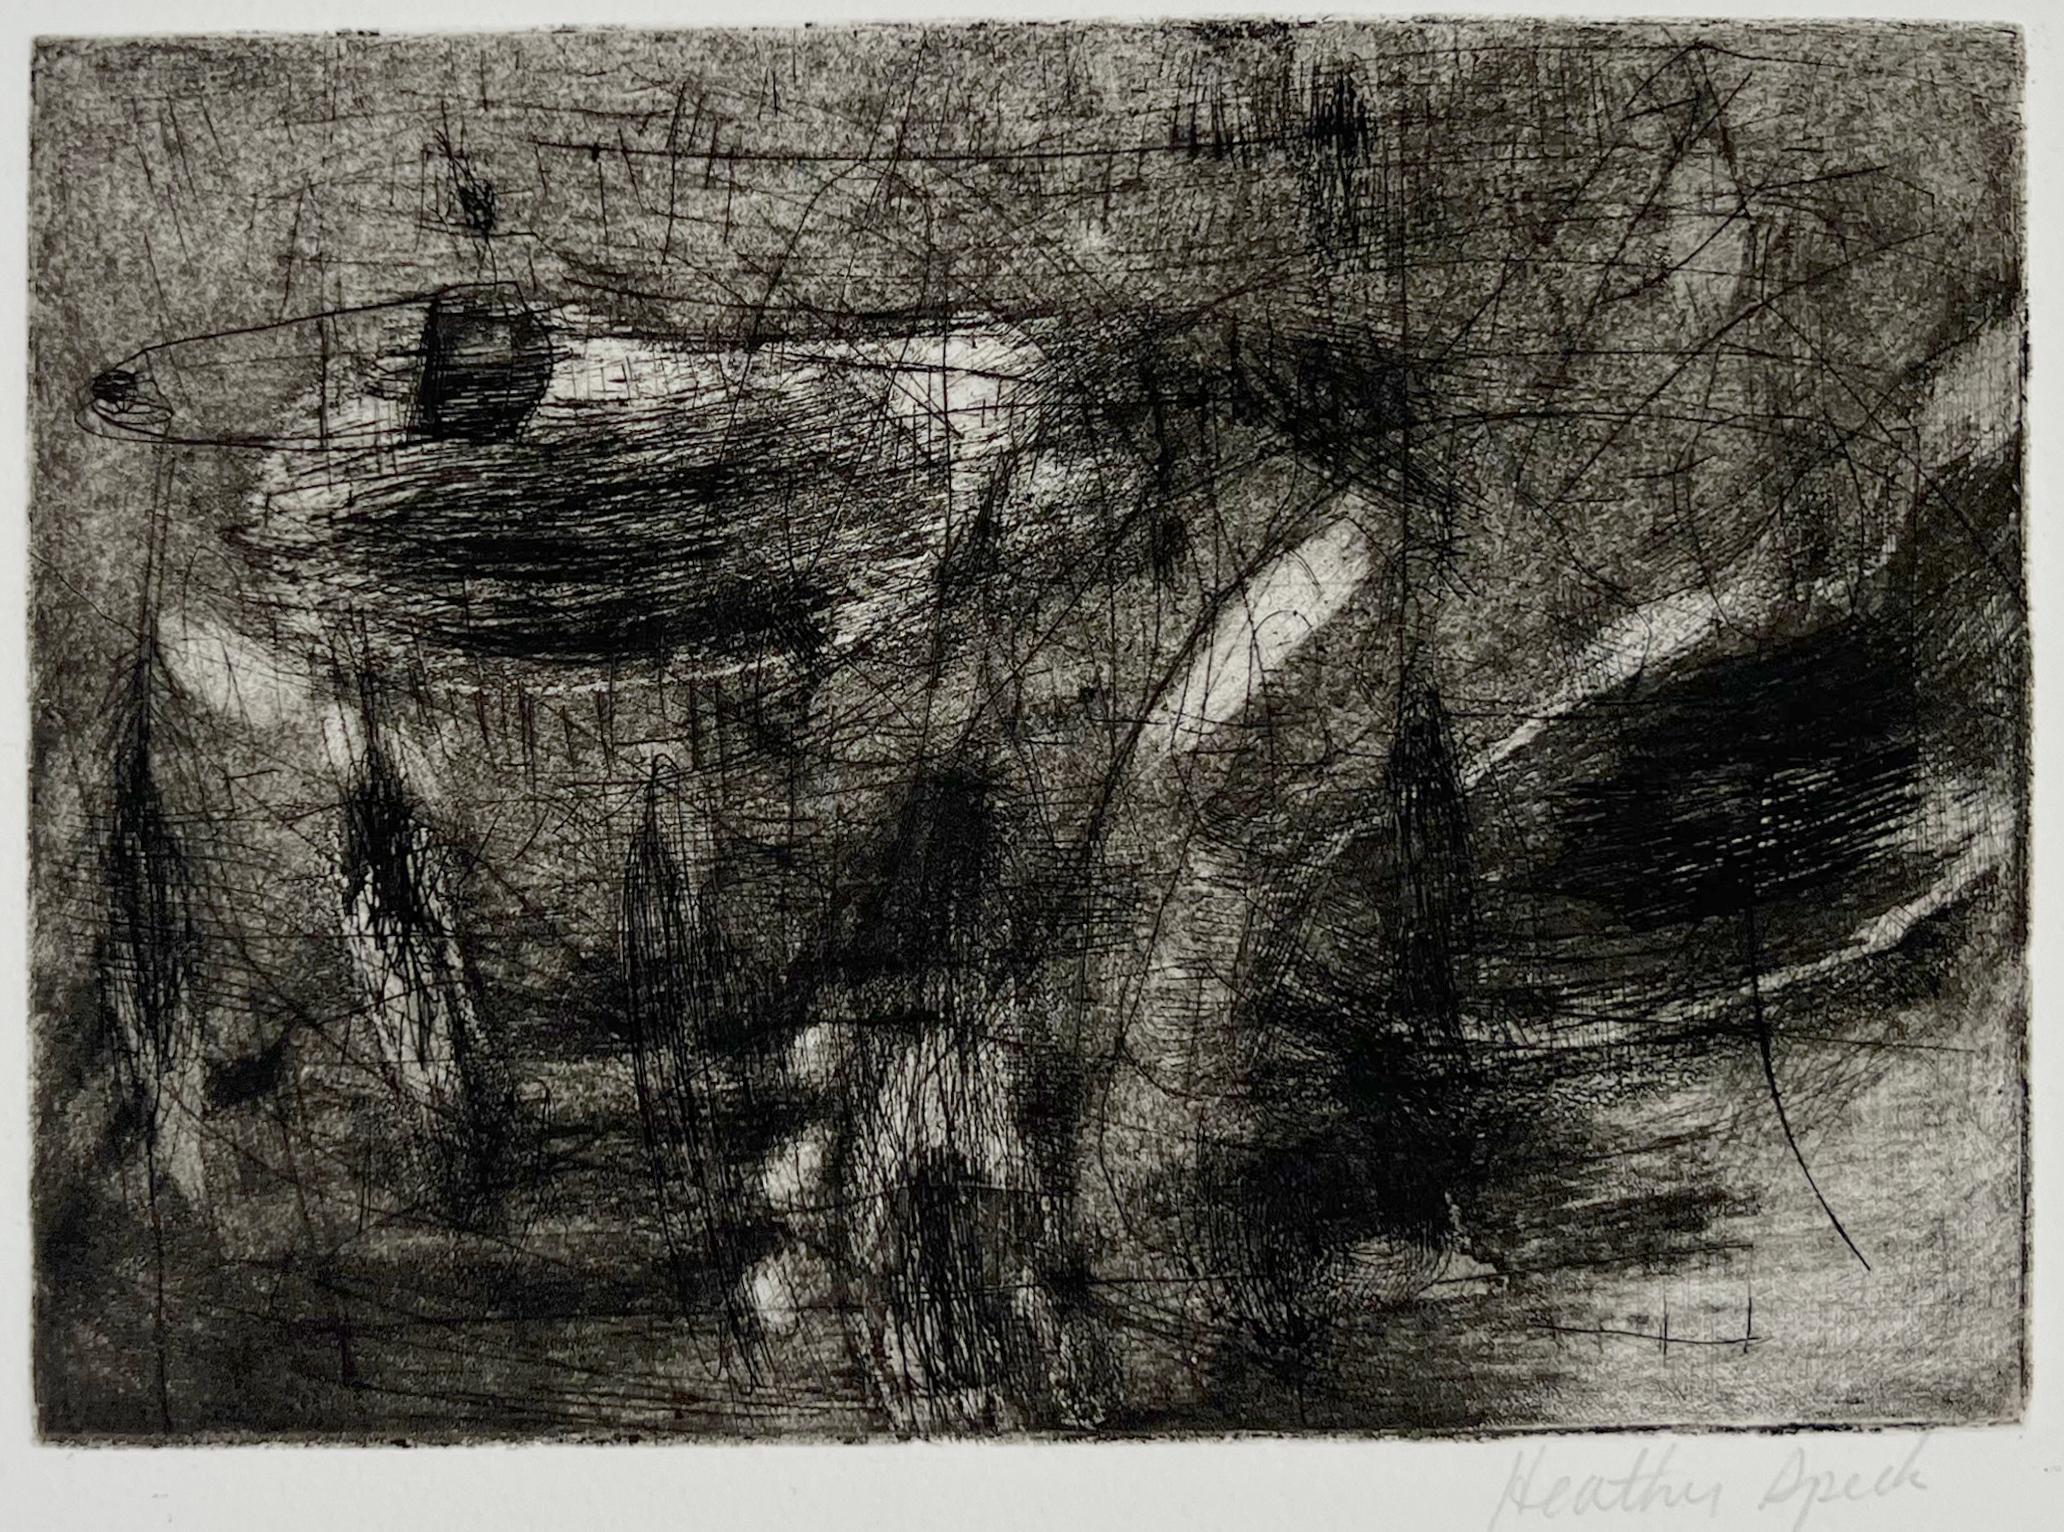 Finely Detailed Abstract W/Woman Carrying a Young Child Collotype on paper
Finely detailed etching or collotype of a complicated fine line drawing of abstract and objective imagery. Signed I believe upside down for effect or accidently. Difficult to